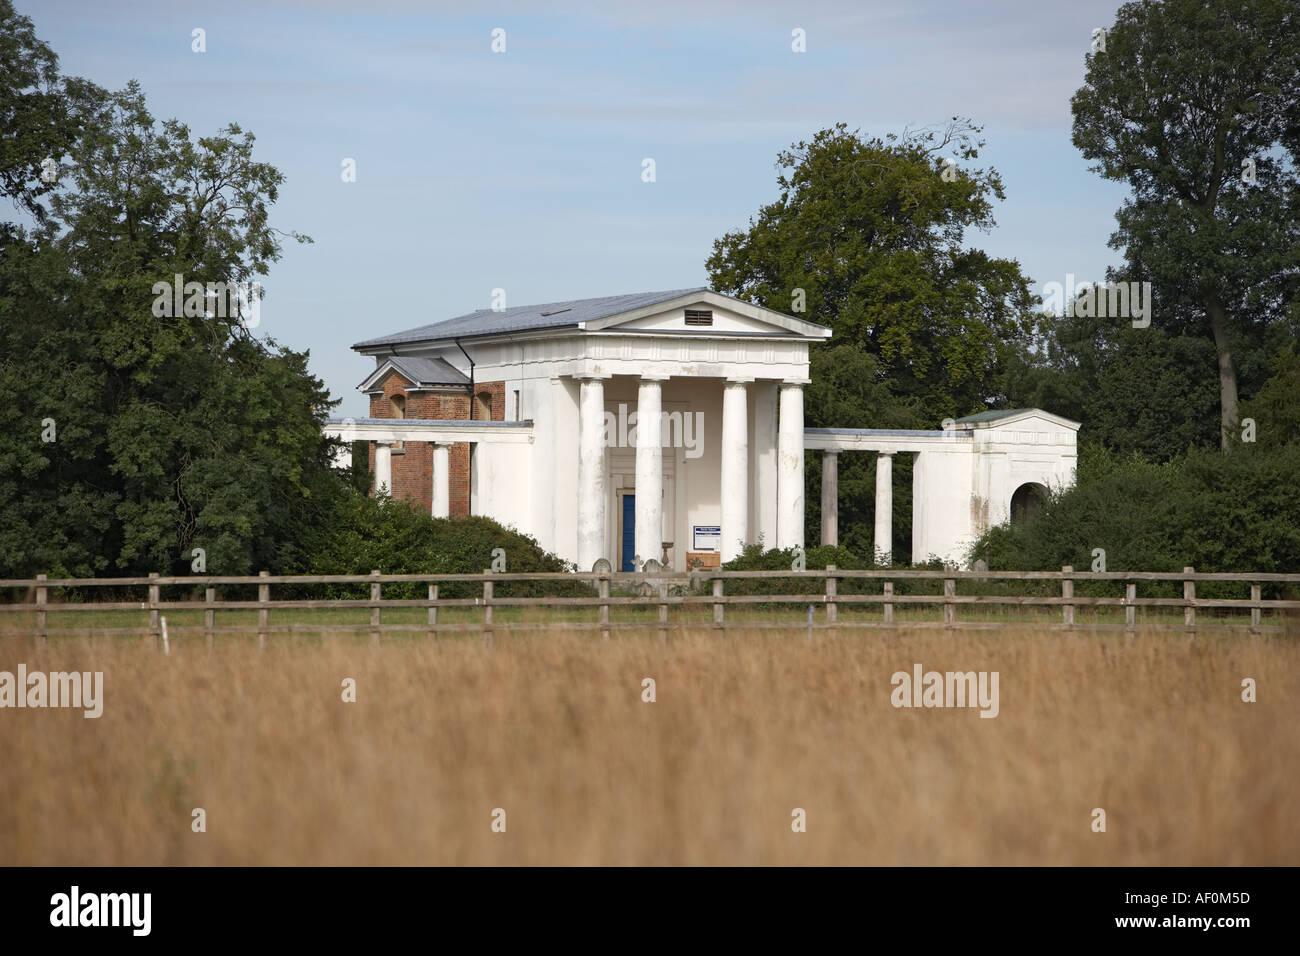 Greco chiesa revivalista a Ayot St Lawrence Hertfordshire Foto Stock